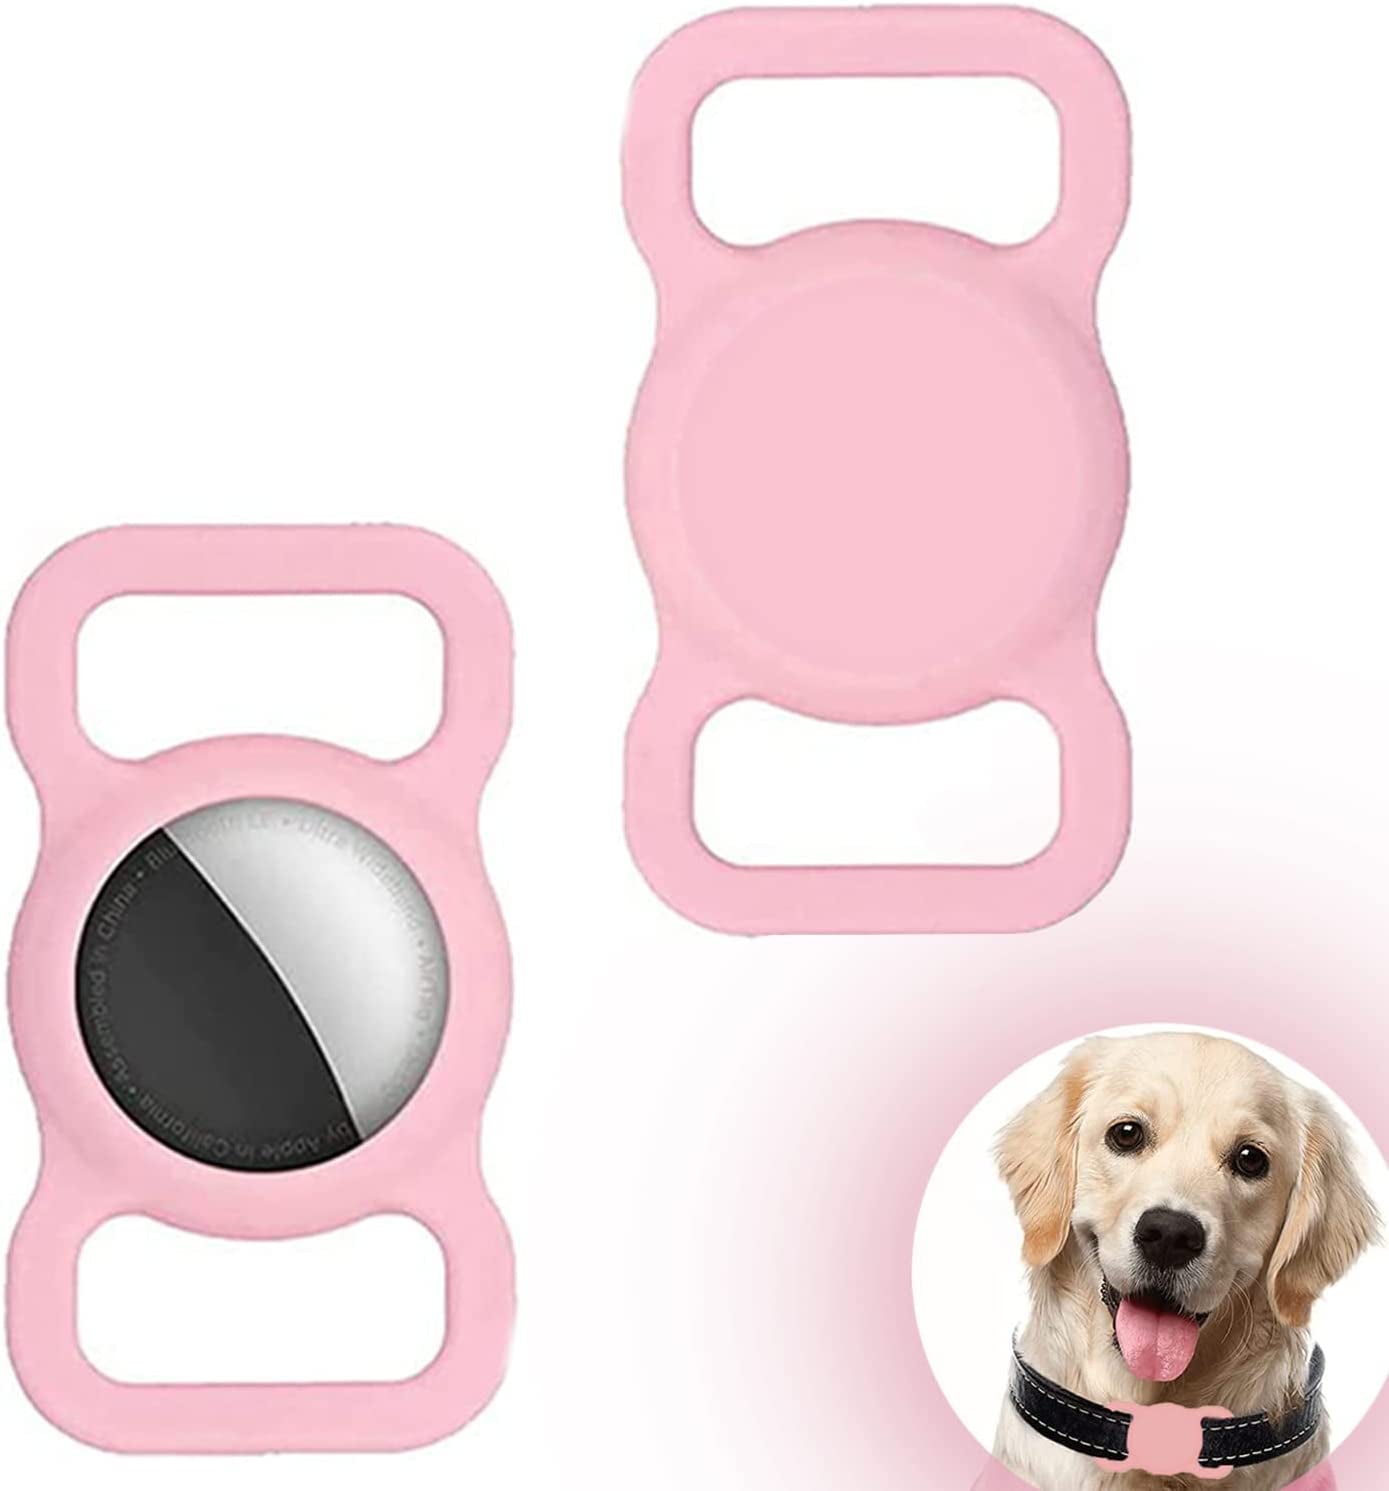 Dog Collar Holder Compatible with Airtag, Soft Silicone Waterproof Protective Case Cover for Apple Air Tags Tracker